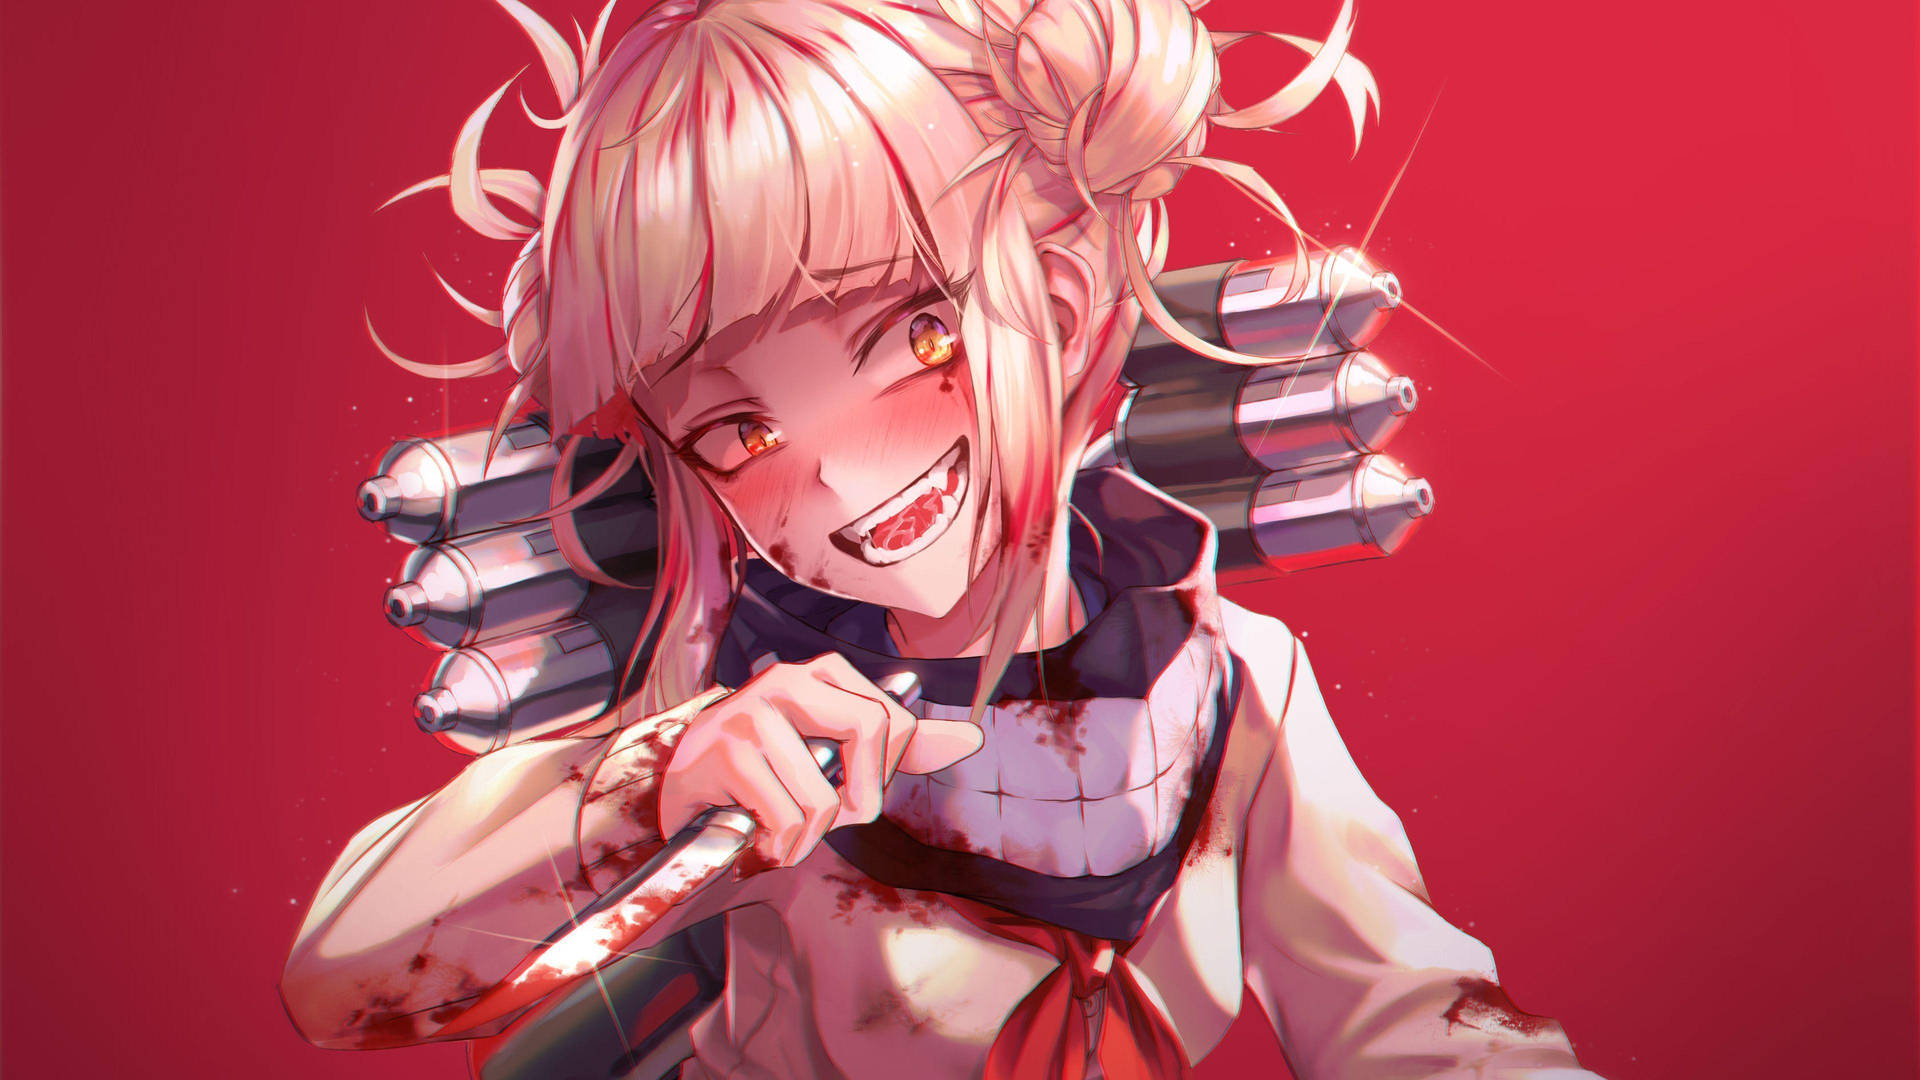 Himiko Toga Bloody Red Art Wallpaper